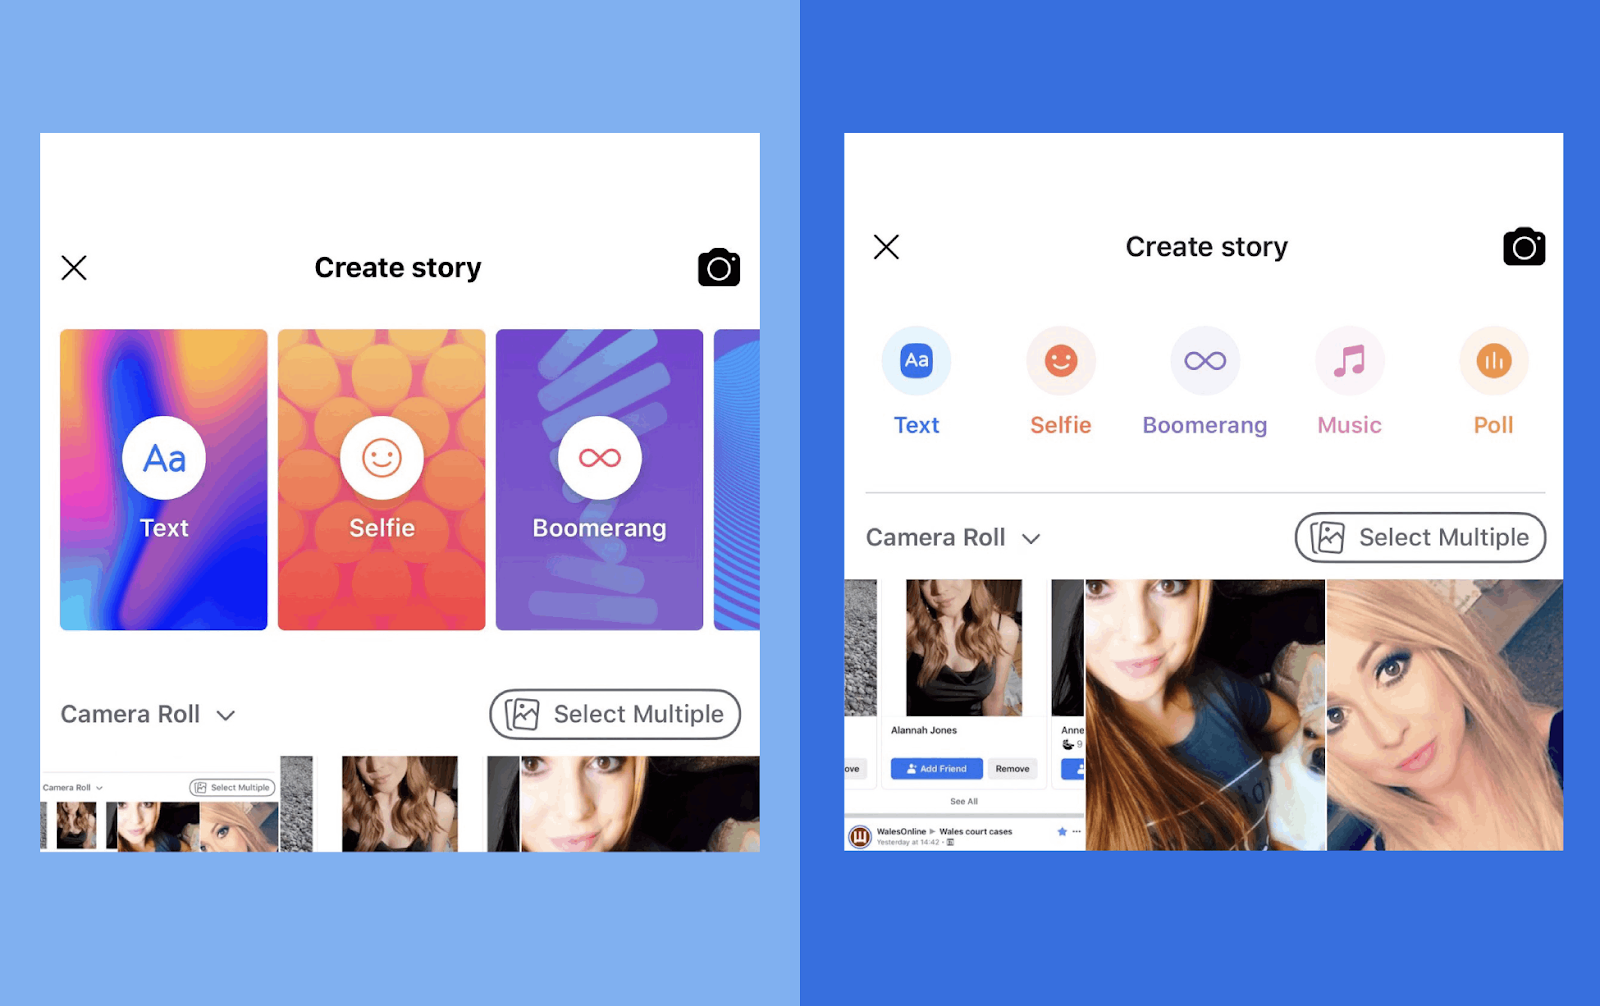 Facebook is testing a new UI for its story creation mode